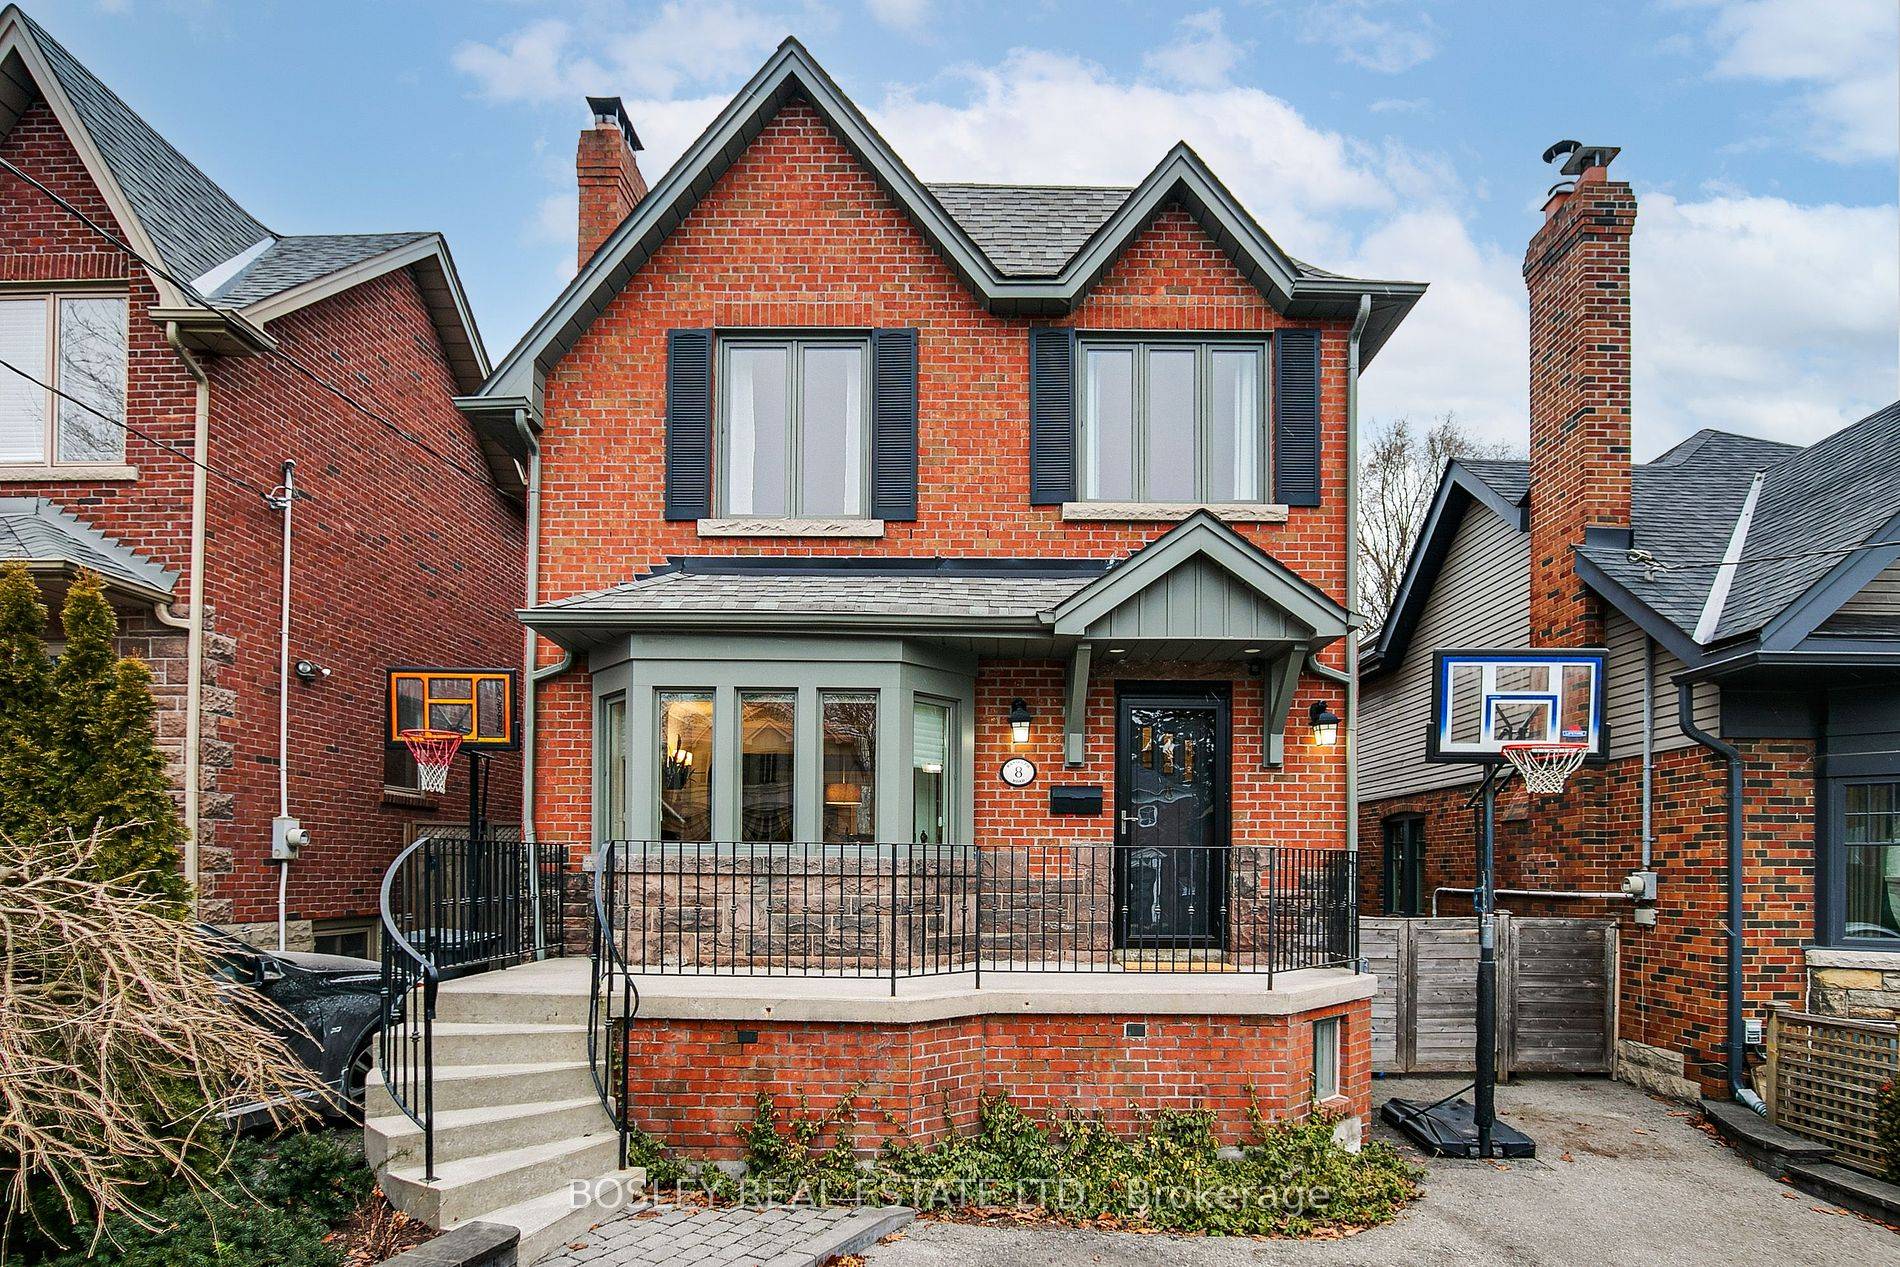 Introducing an enchanting red brick detached home nestled in coveted South Leaside.